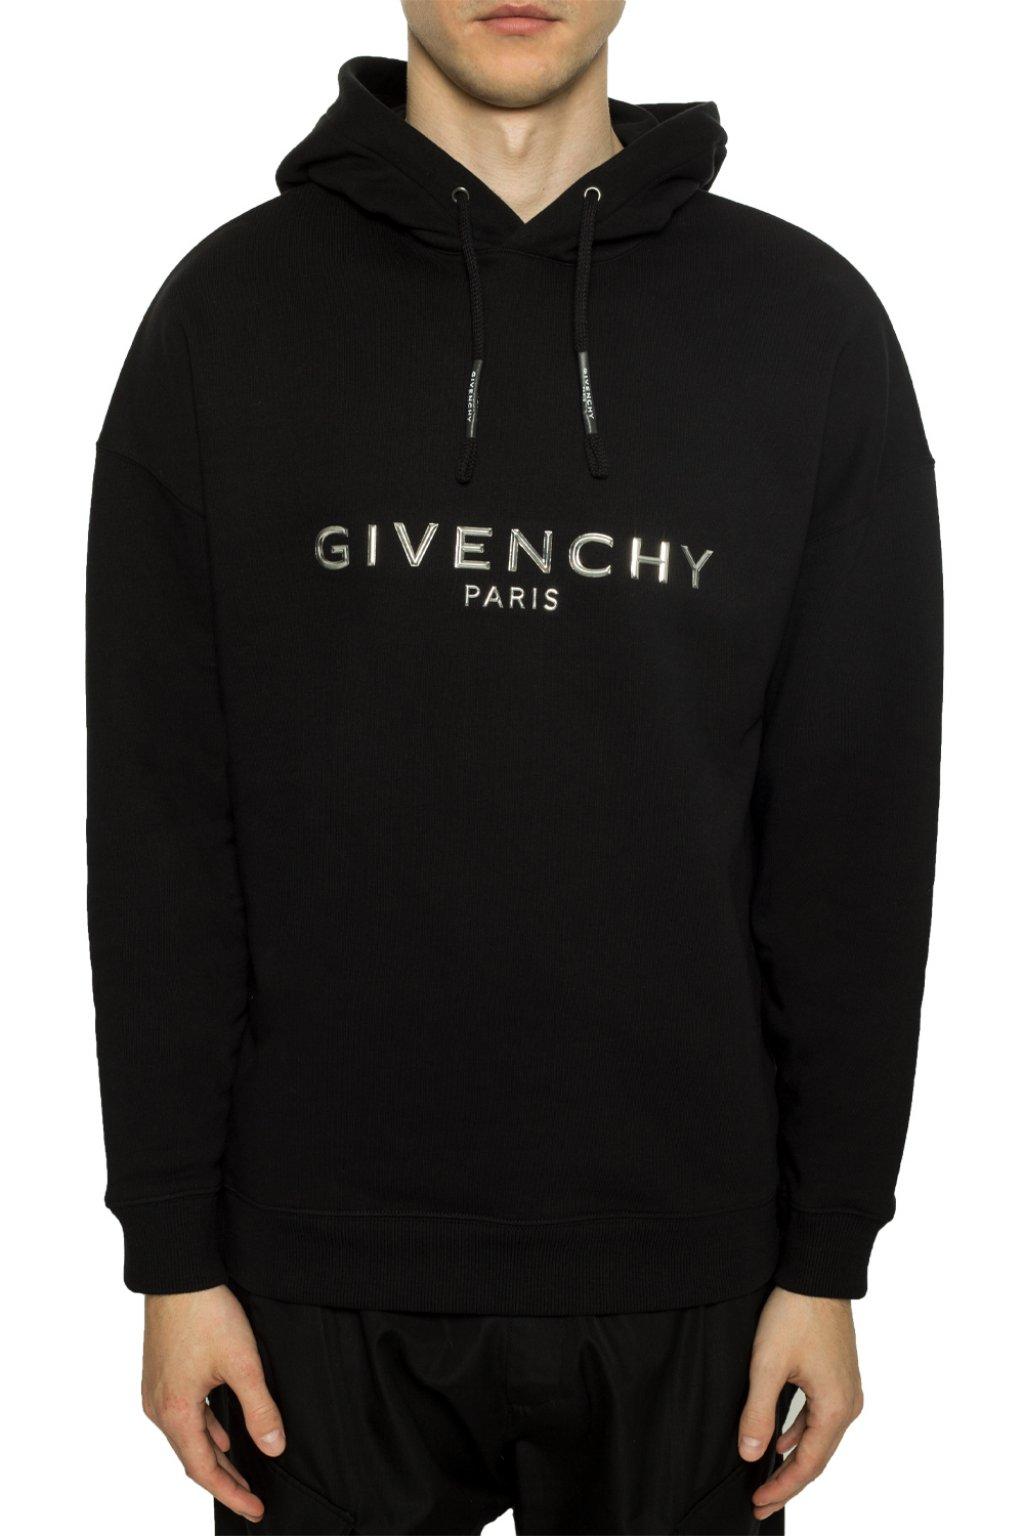 Givenchy Cotton Hooded Sweatshirt With Logo in Black for Men - Lyst